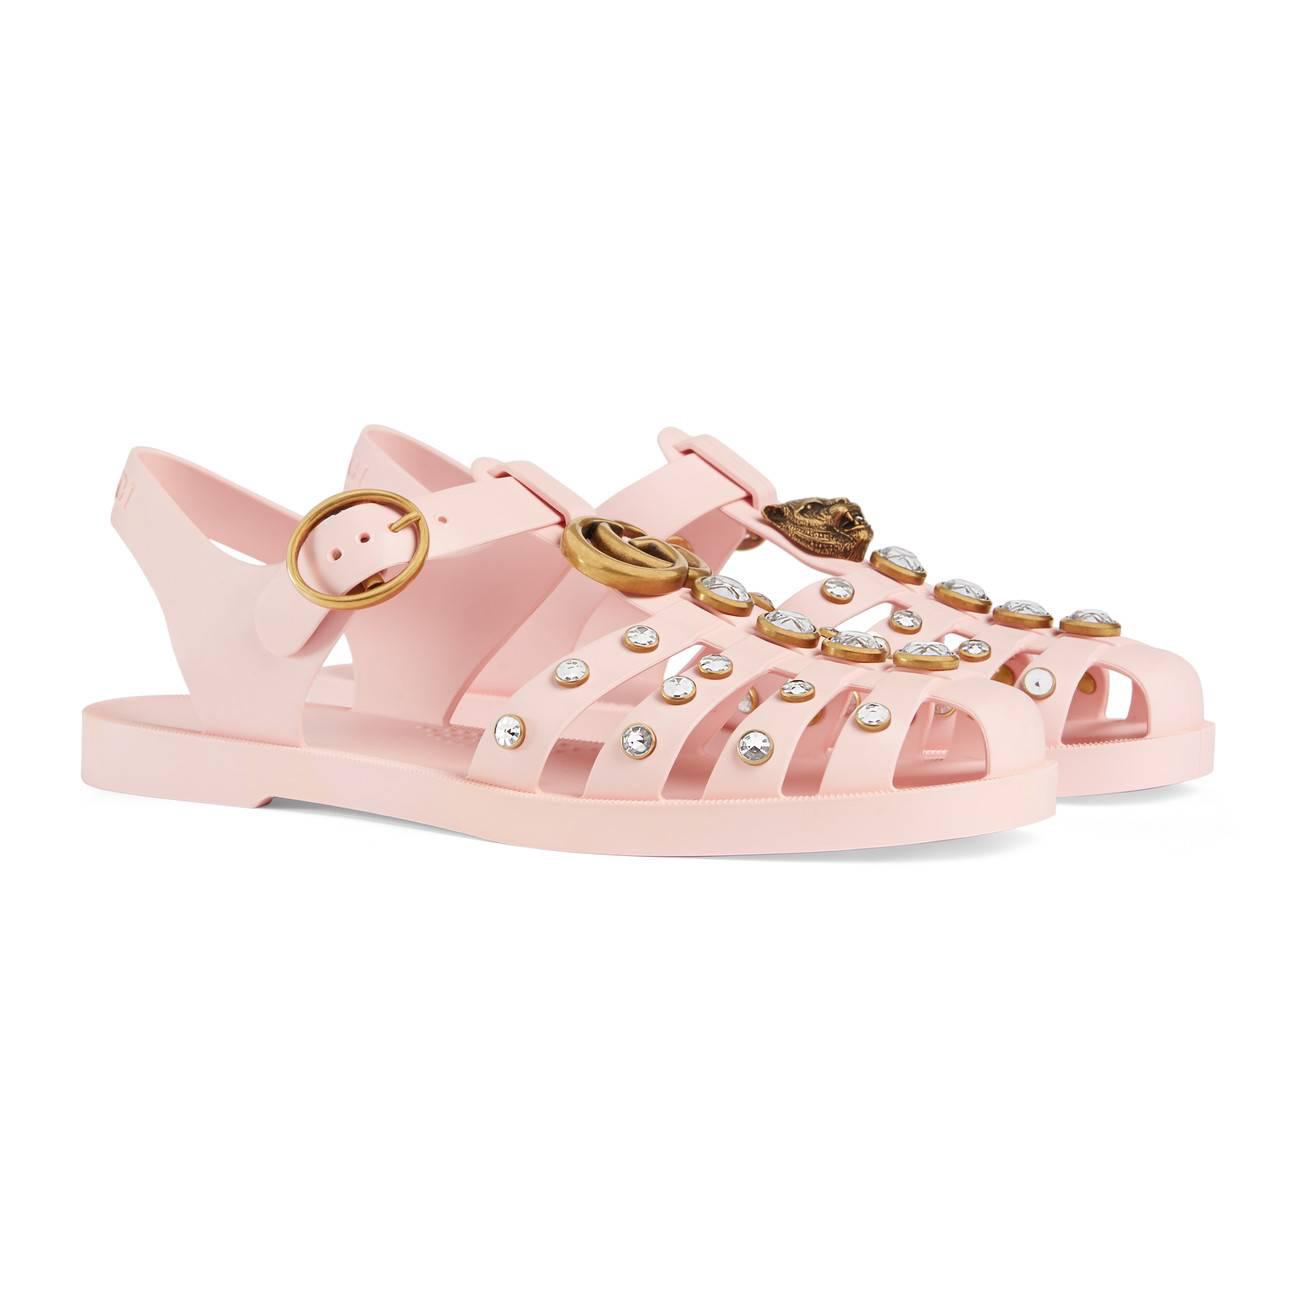 Gucci Rubber Sandal With Crystals in Pink - Lyst